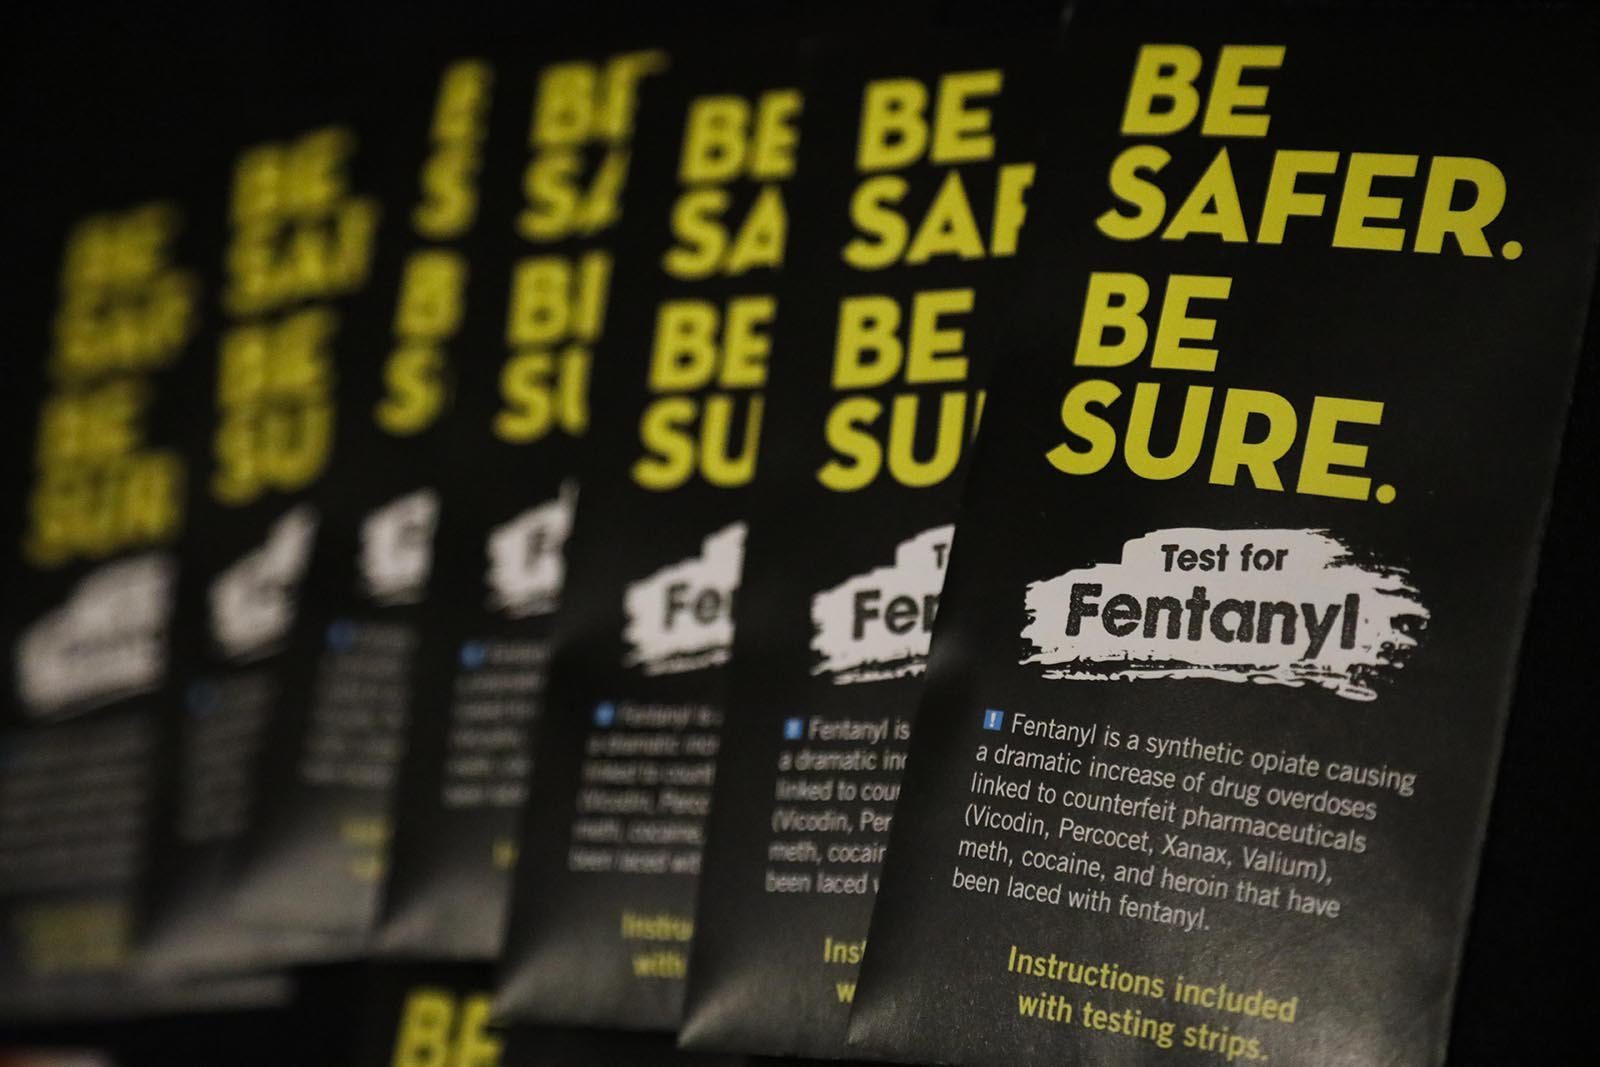 Fentanyl Test Strips Save Lives and the Dangers of Fentanyl